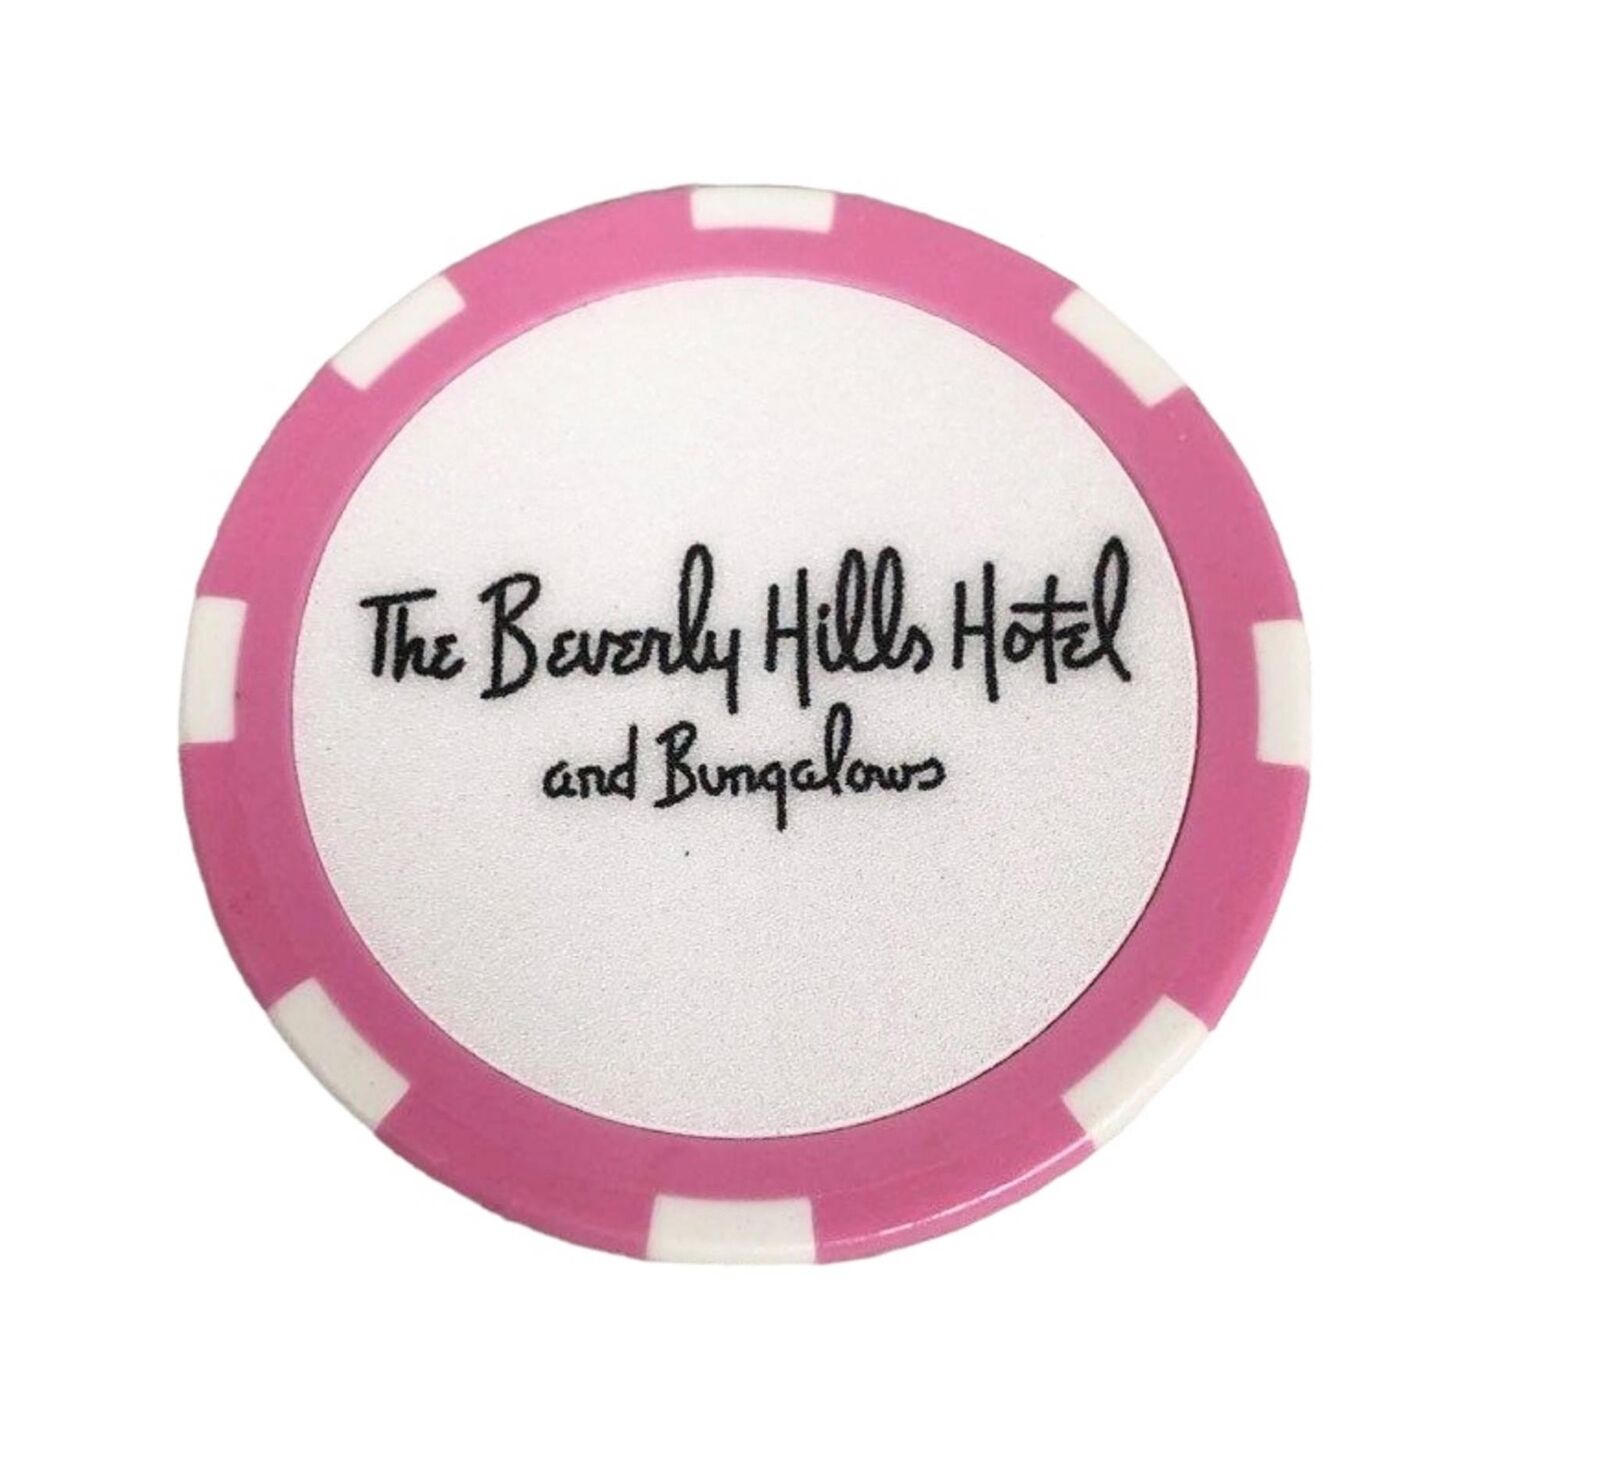 Vintage 5 Star Luxury The Beverly Hills Hotel and Bungalows Chip Poker Token